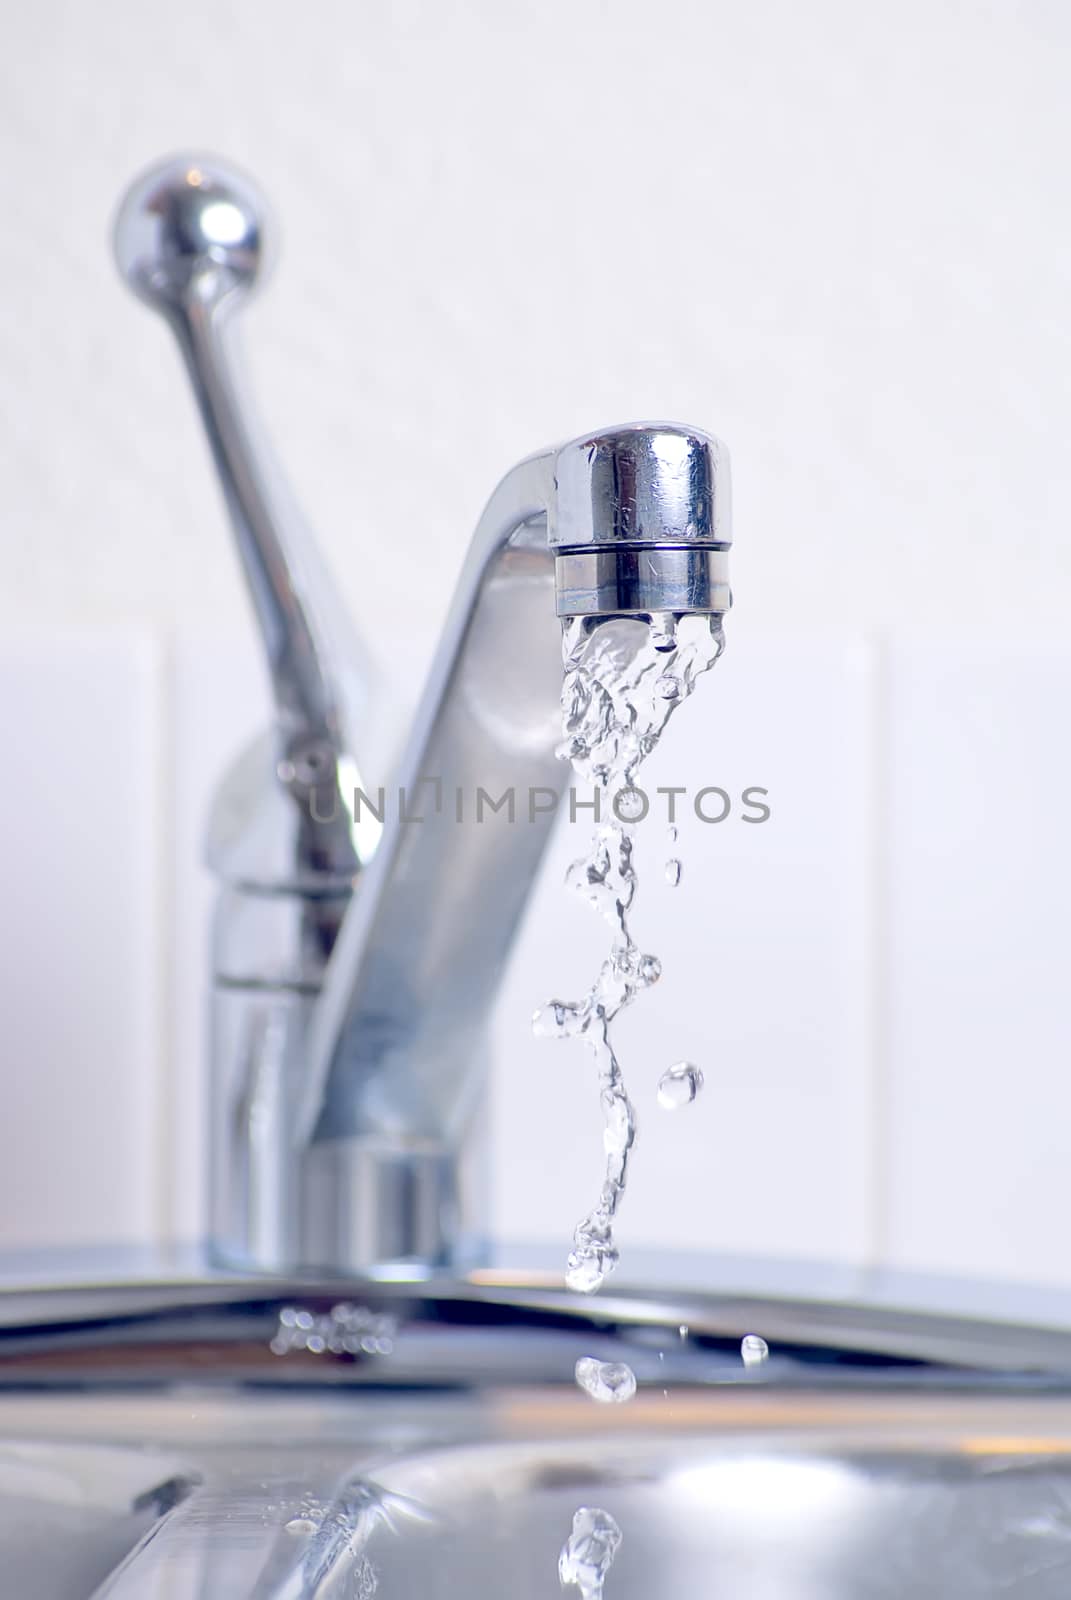 Kitchen sink faucet with small stream of water